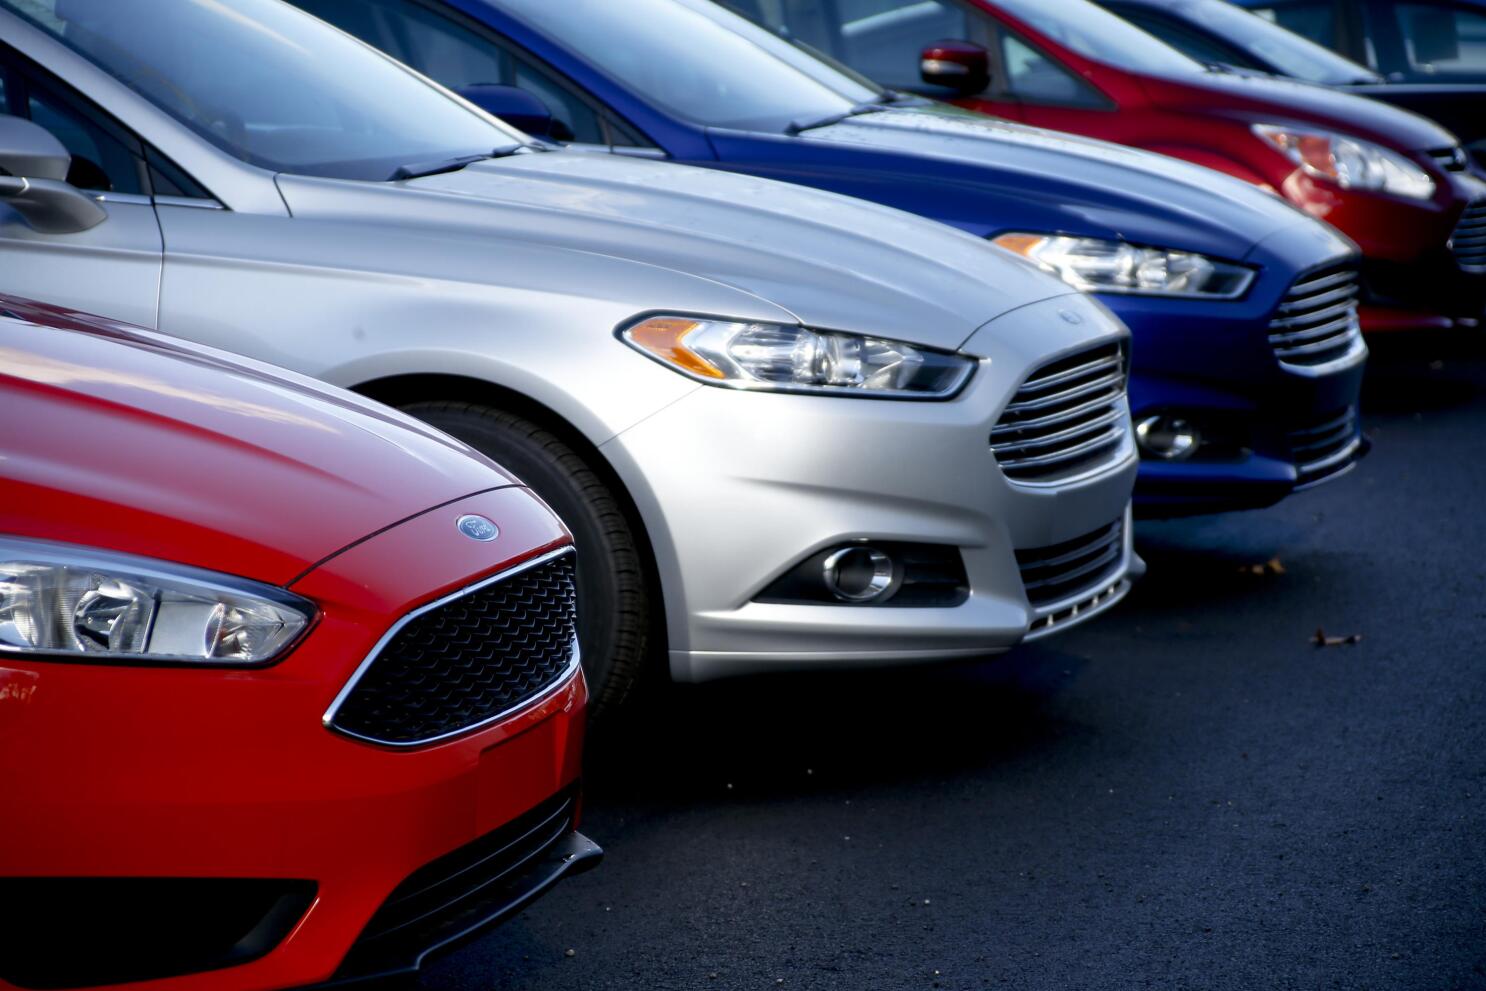 US auto sales to rise in May as inventories improve - report